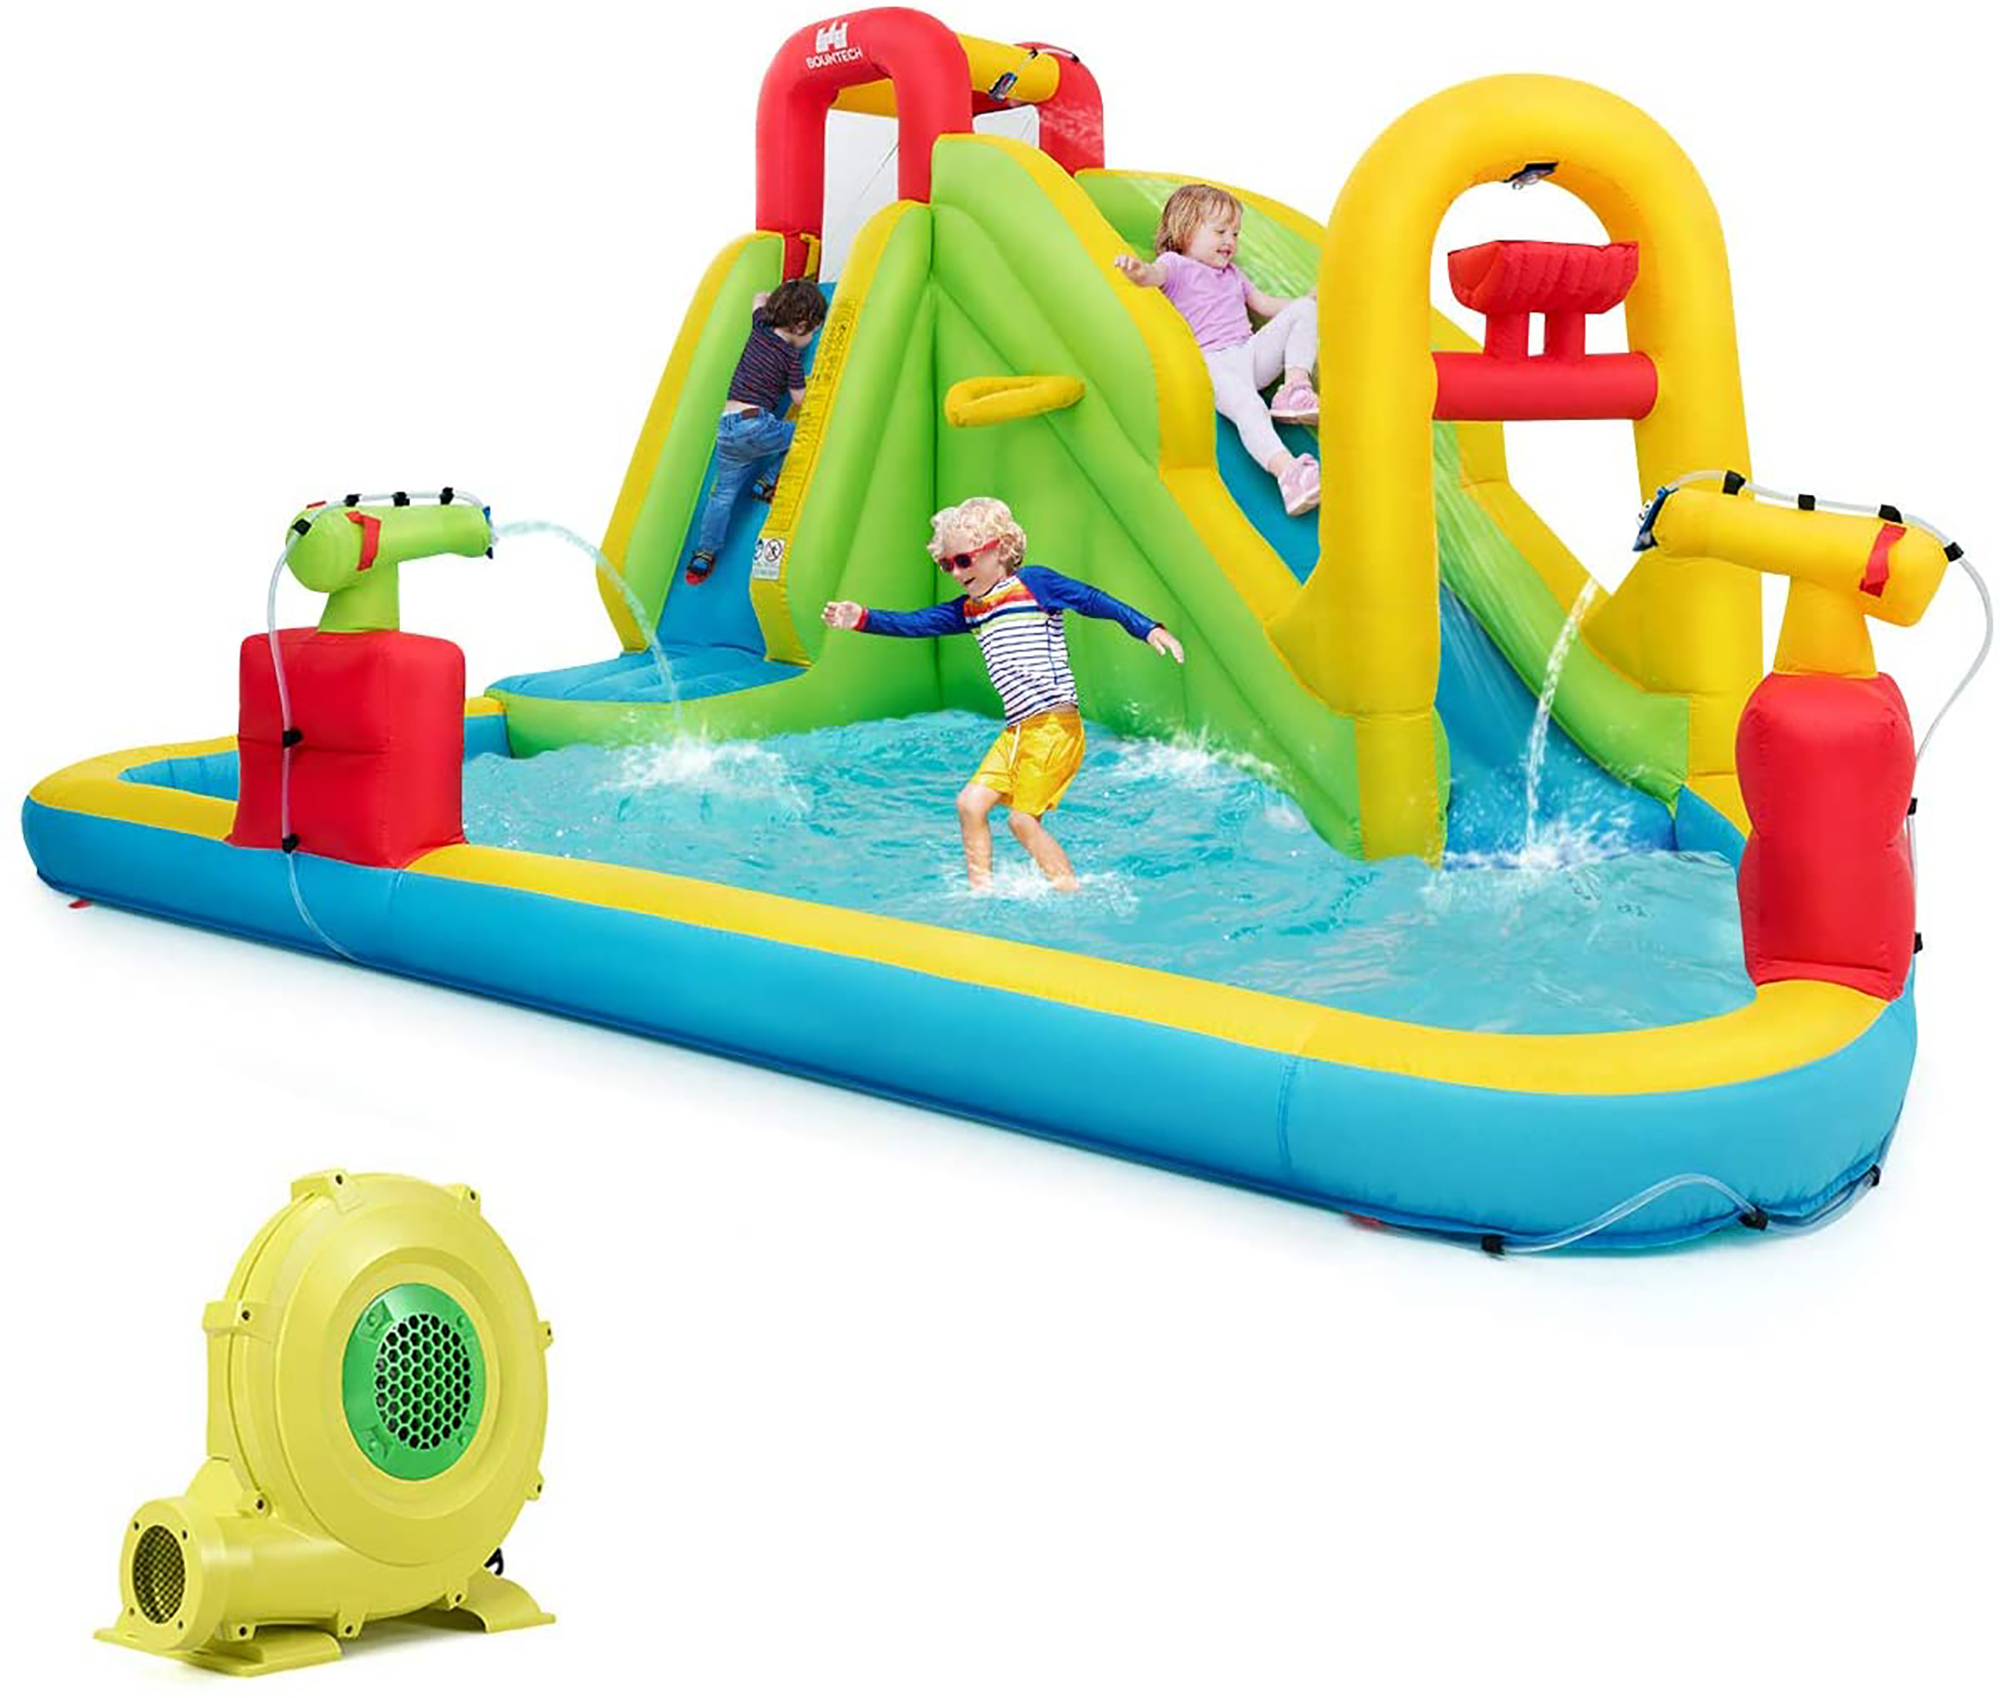 Costway Inflatable Water Slide Kids Splash Pool Bounce House with 480w Blower - image 1 of 8